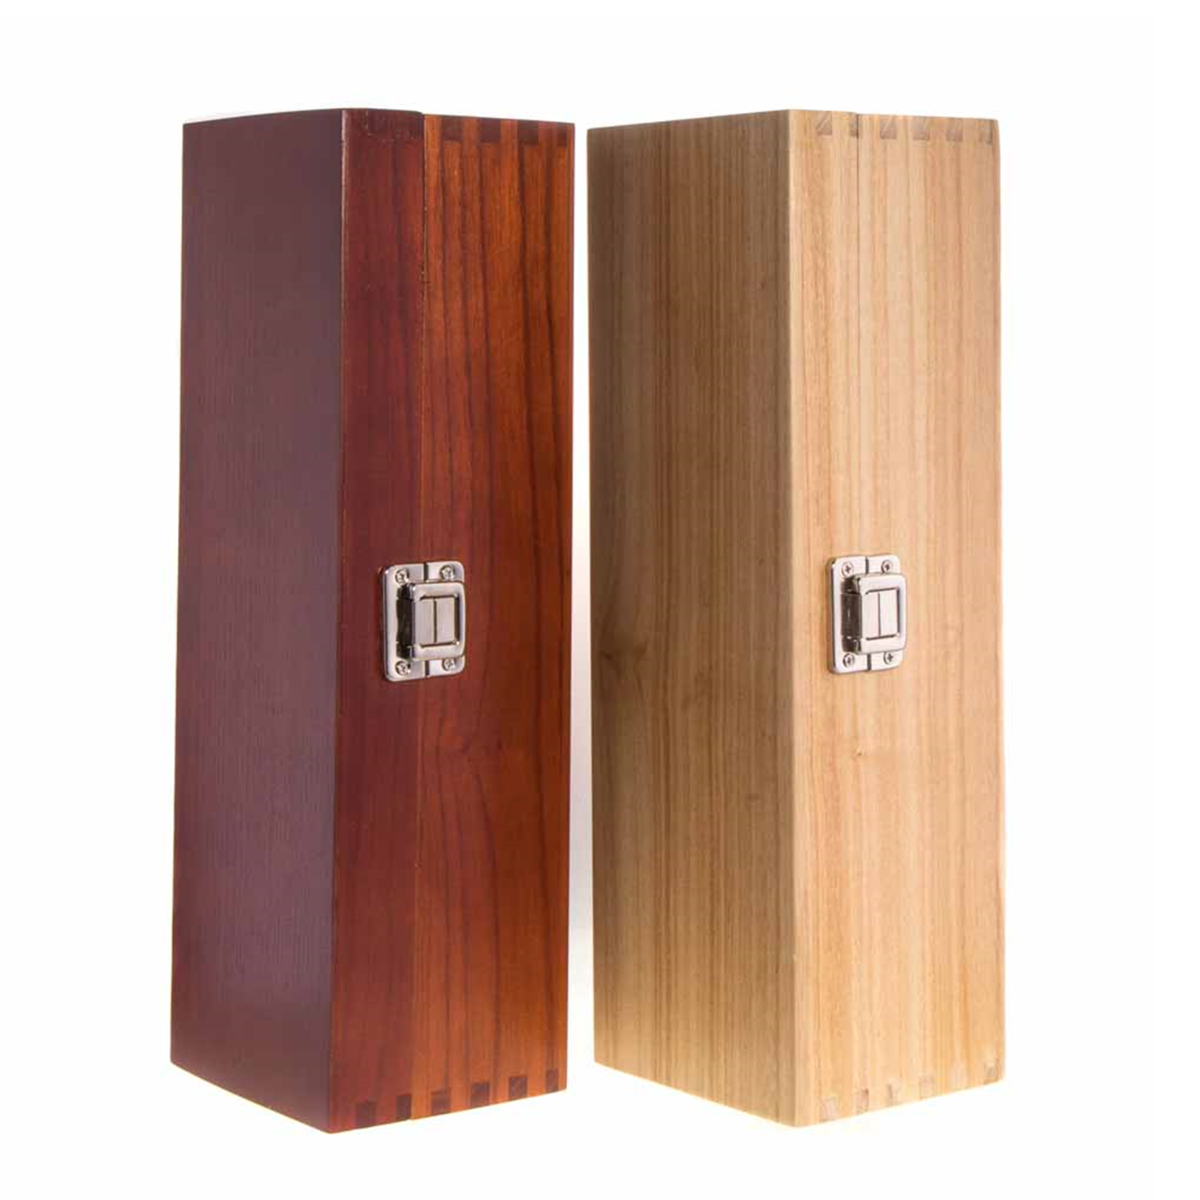 fsc wooden champagne box and bottle